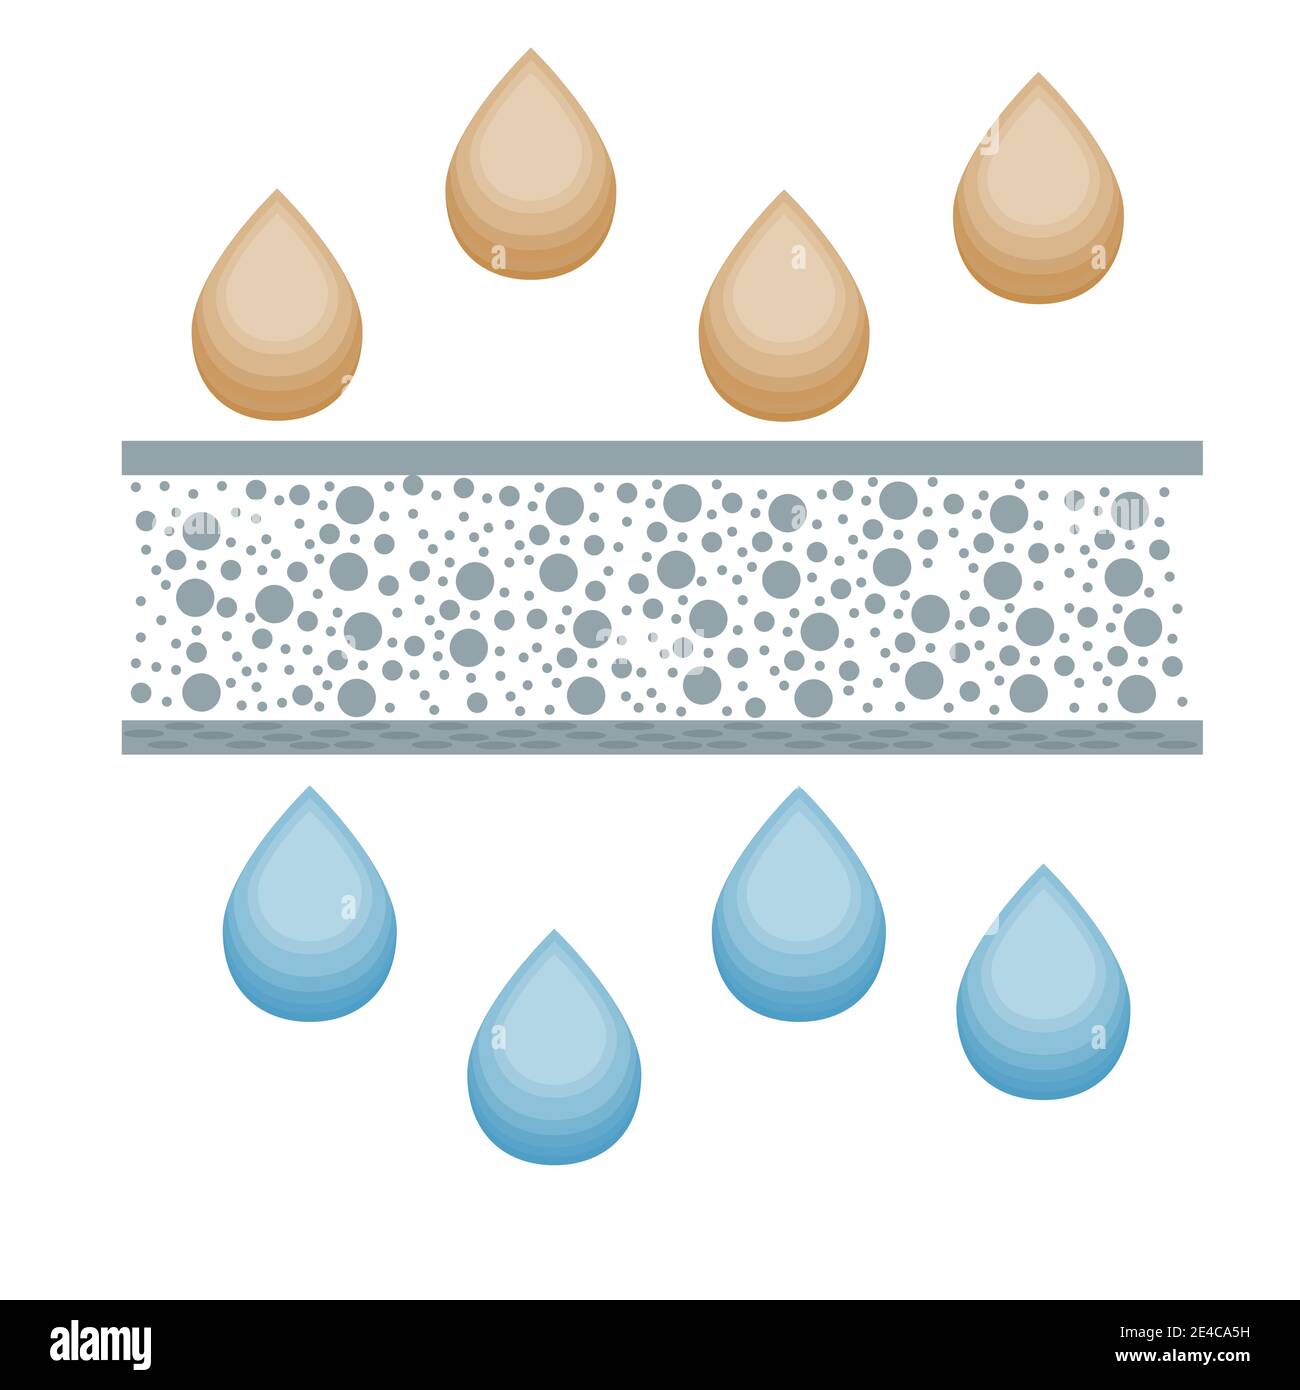 Water drops and process of filtration, symbol cleaning technology isolated on white background. Mineral filter, method cleanliness. Vector illustration Stock Vector